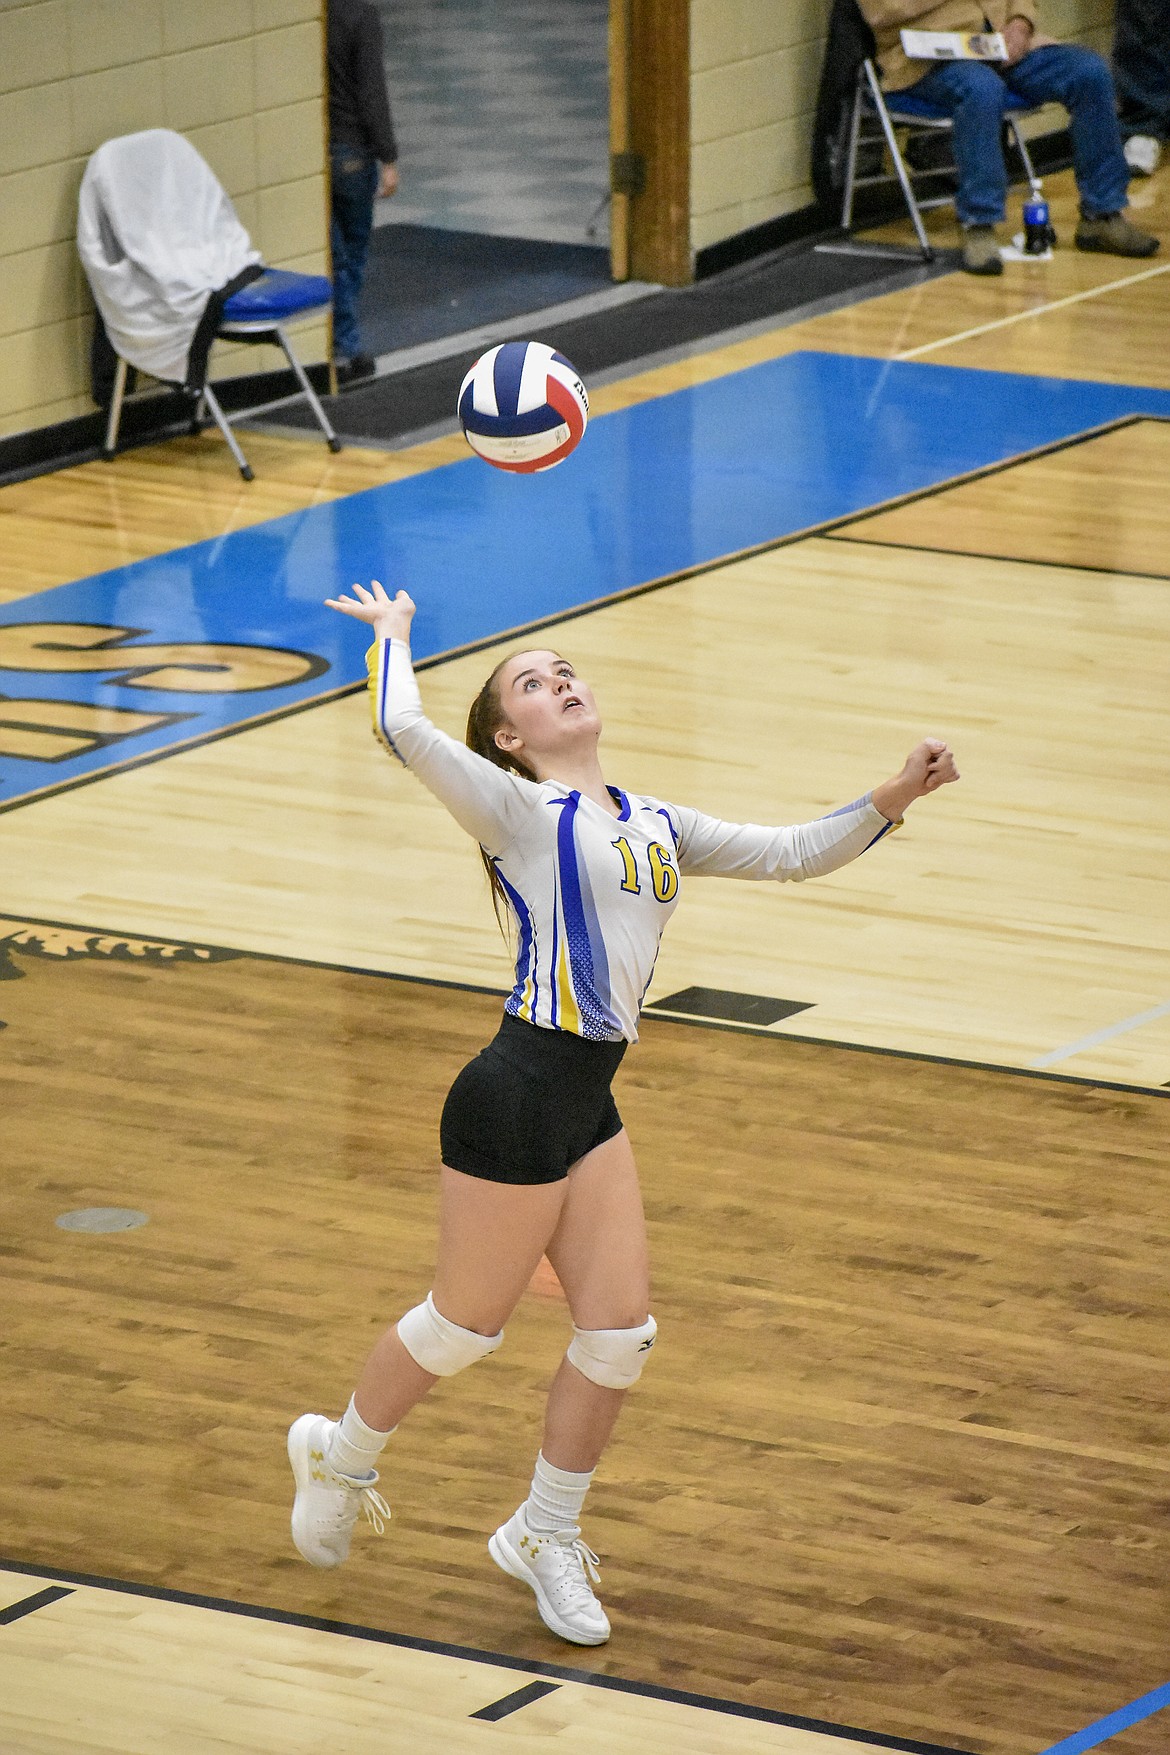 Libby junior Kylee Quinn serves up an ace during the final set against Whitefish Saturday, as the Lady Loggers went on to win the 2018-2019 Northwest A District Championship in three. (Ben Kibbey/The Western News)